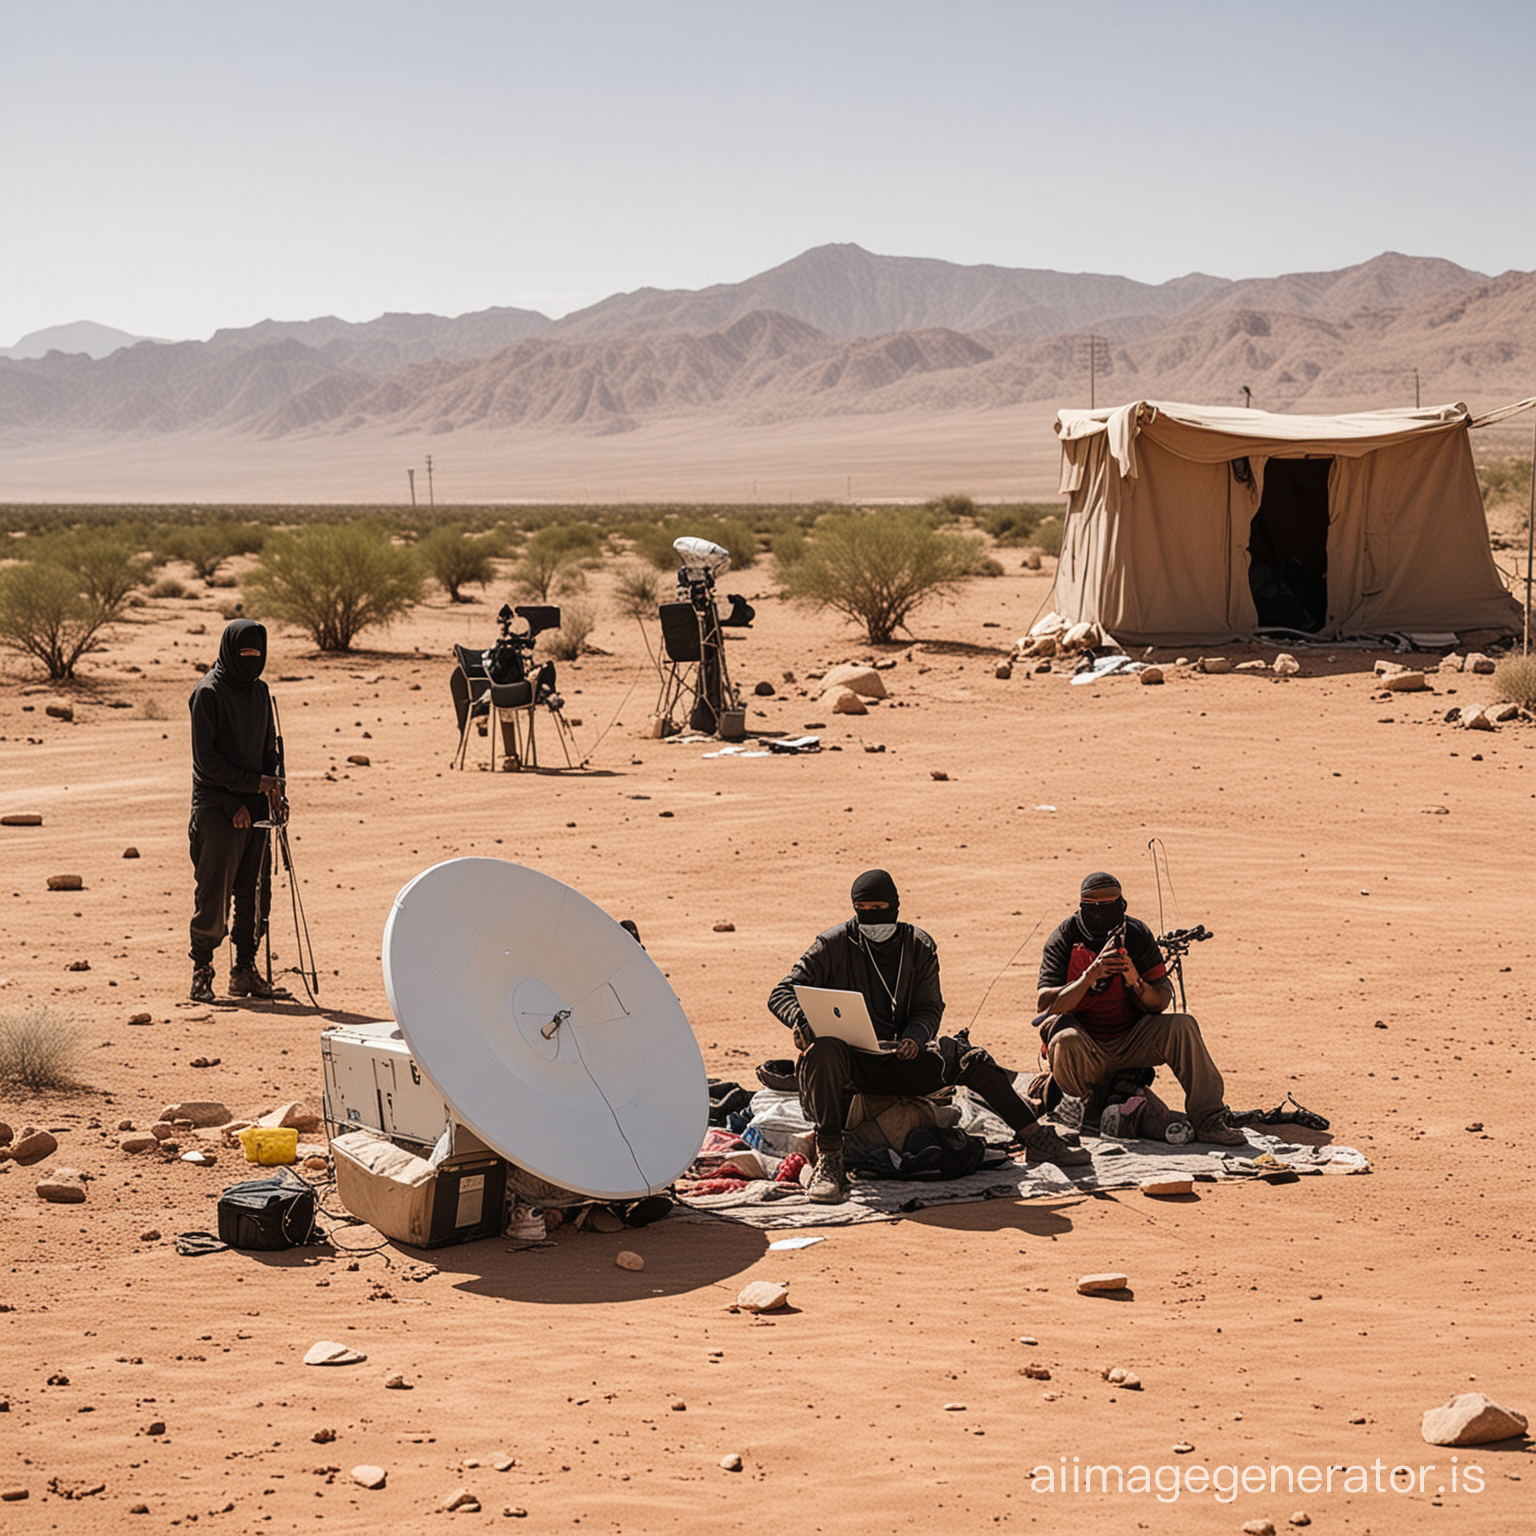 nefarious group at a makeshift hideaway in the dessert using internet from satellite dish